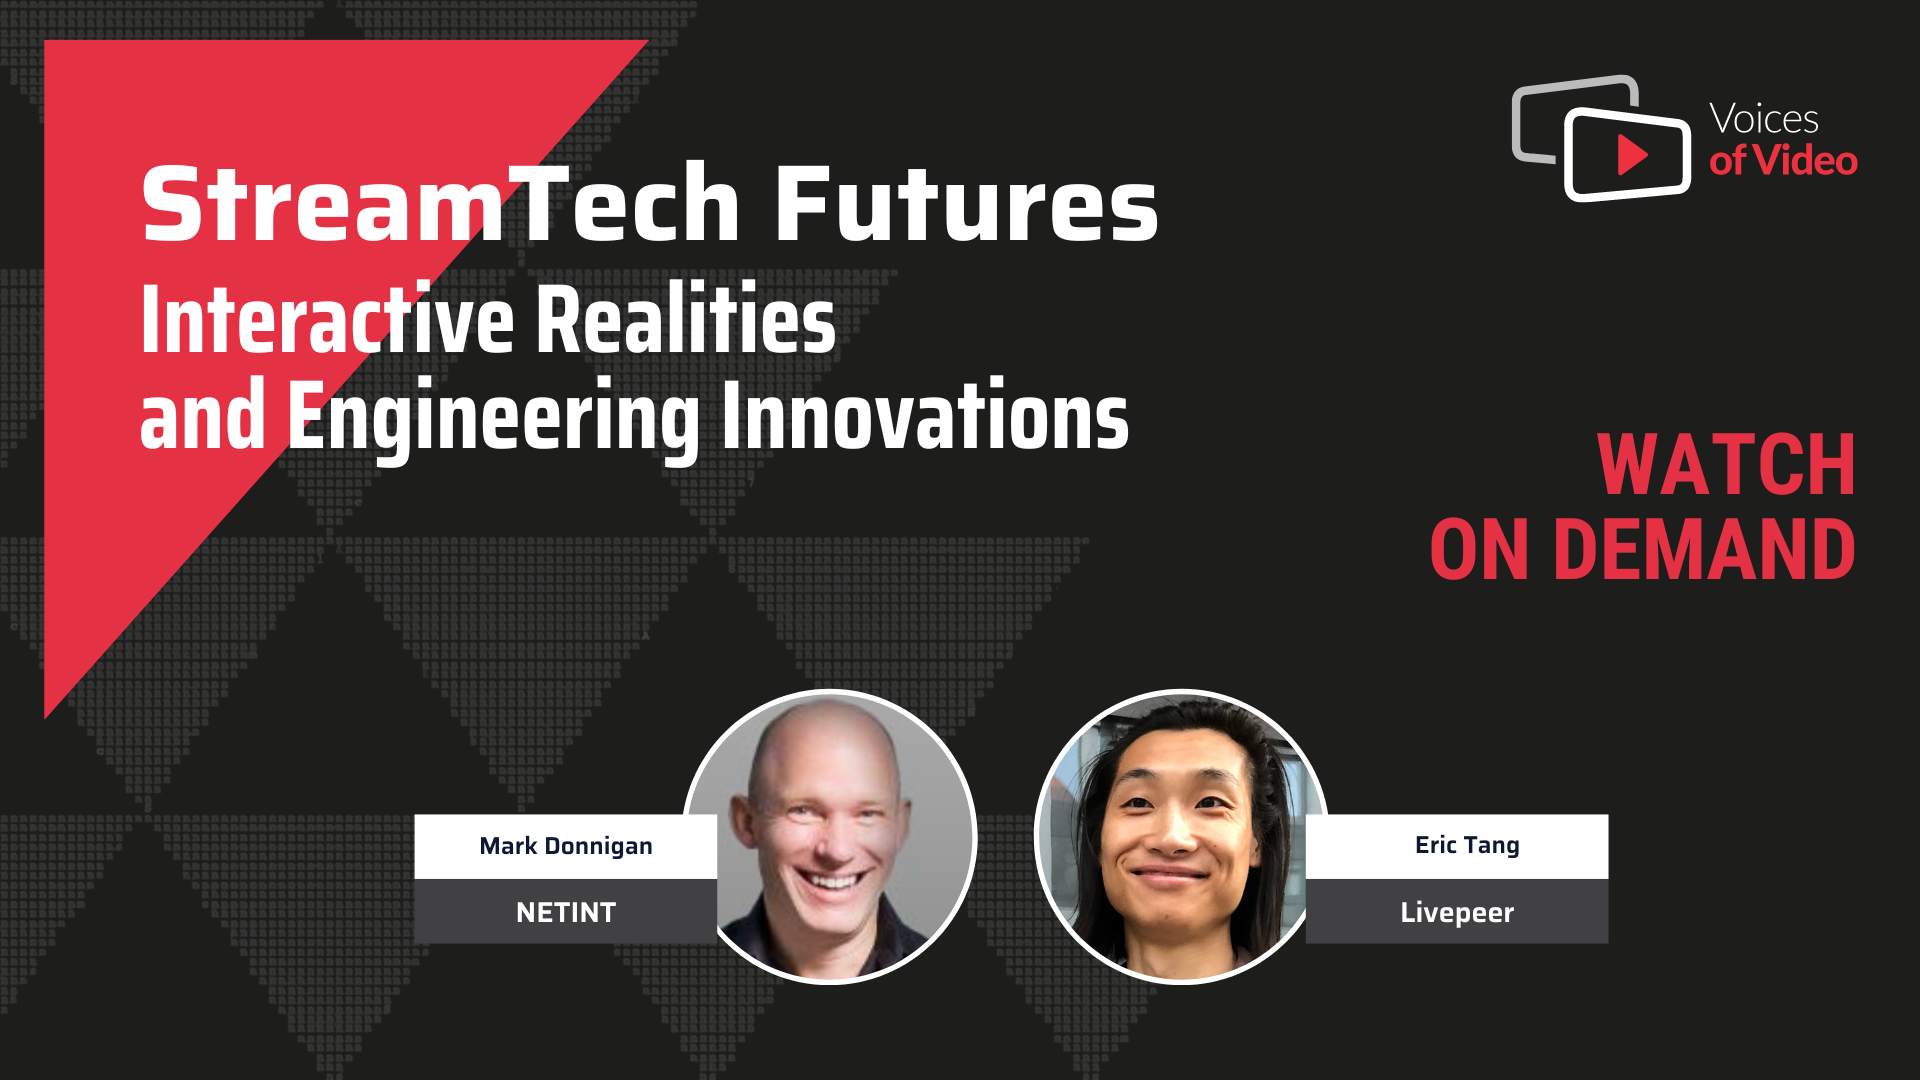 StreamTech Futures: Interactive Realities and Engineering Innovations. Voices of Video with Eric Tang.